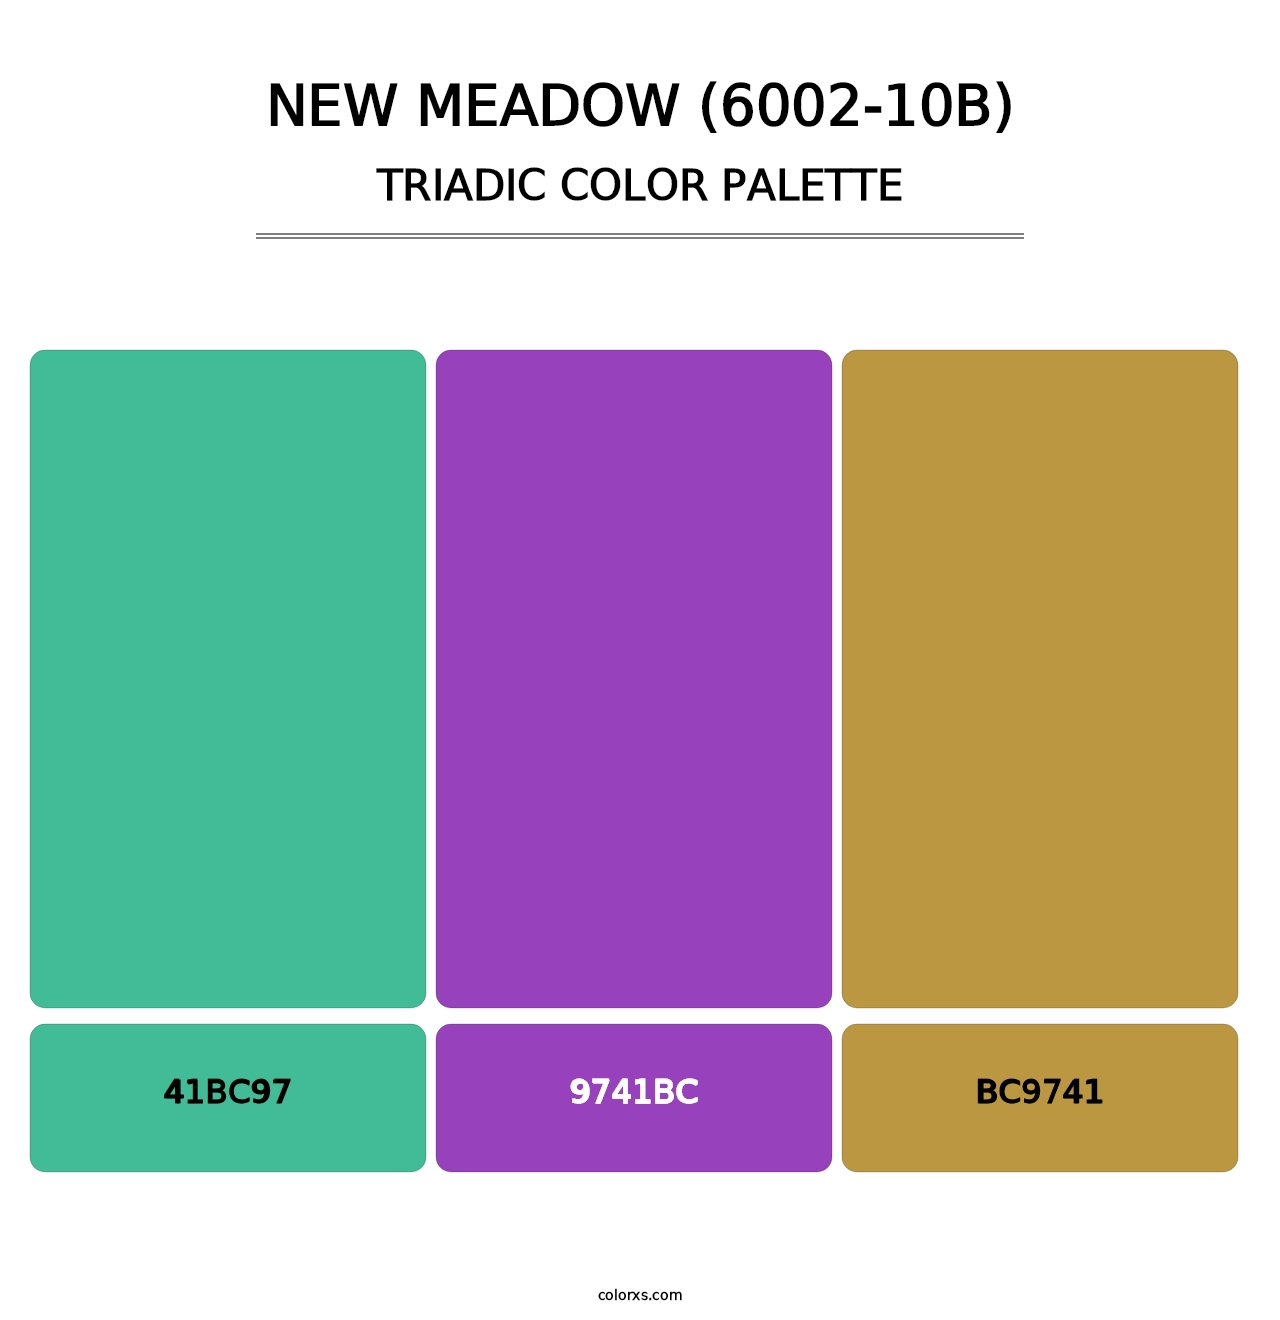 New Meadow (6002-10B) - Triadic Color Palette